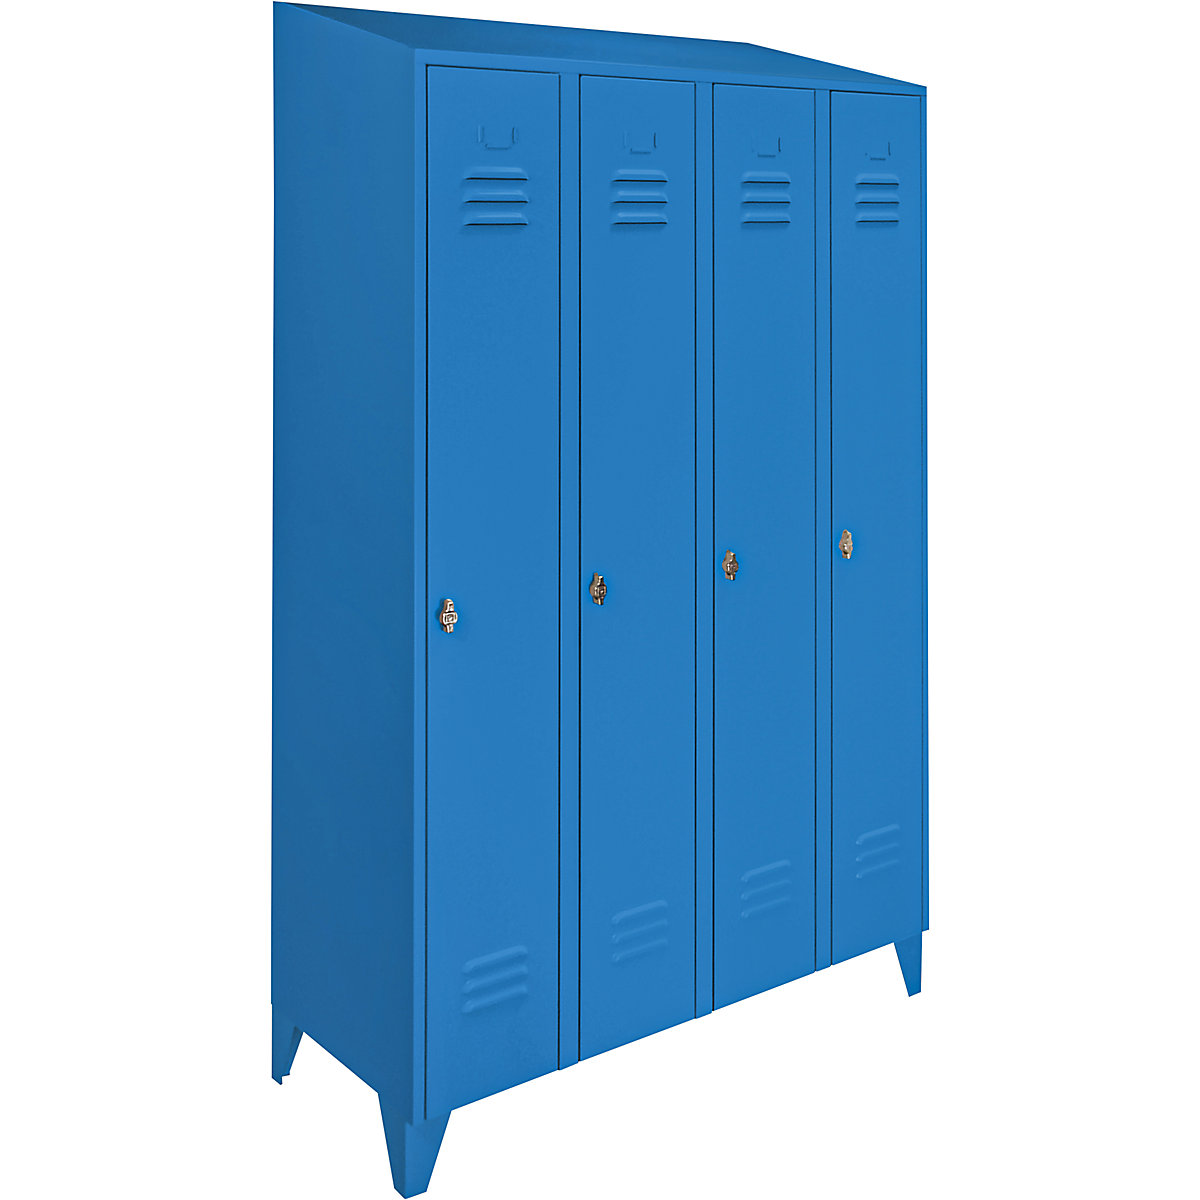 Steel cupboard with sloping top, full height compartments – Wolf, total width 1200 mm, 4 compartments, light blue RAL 5012-3